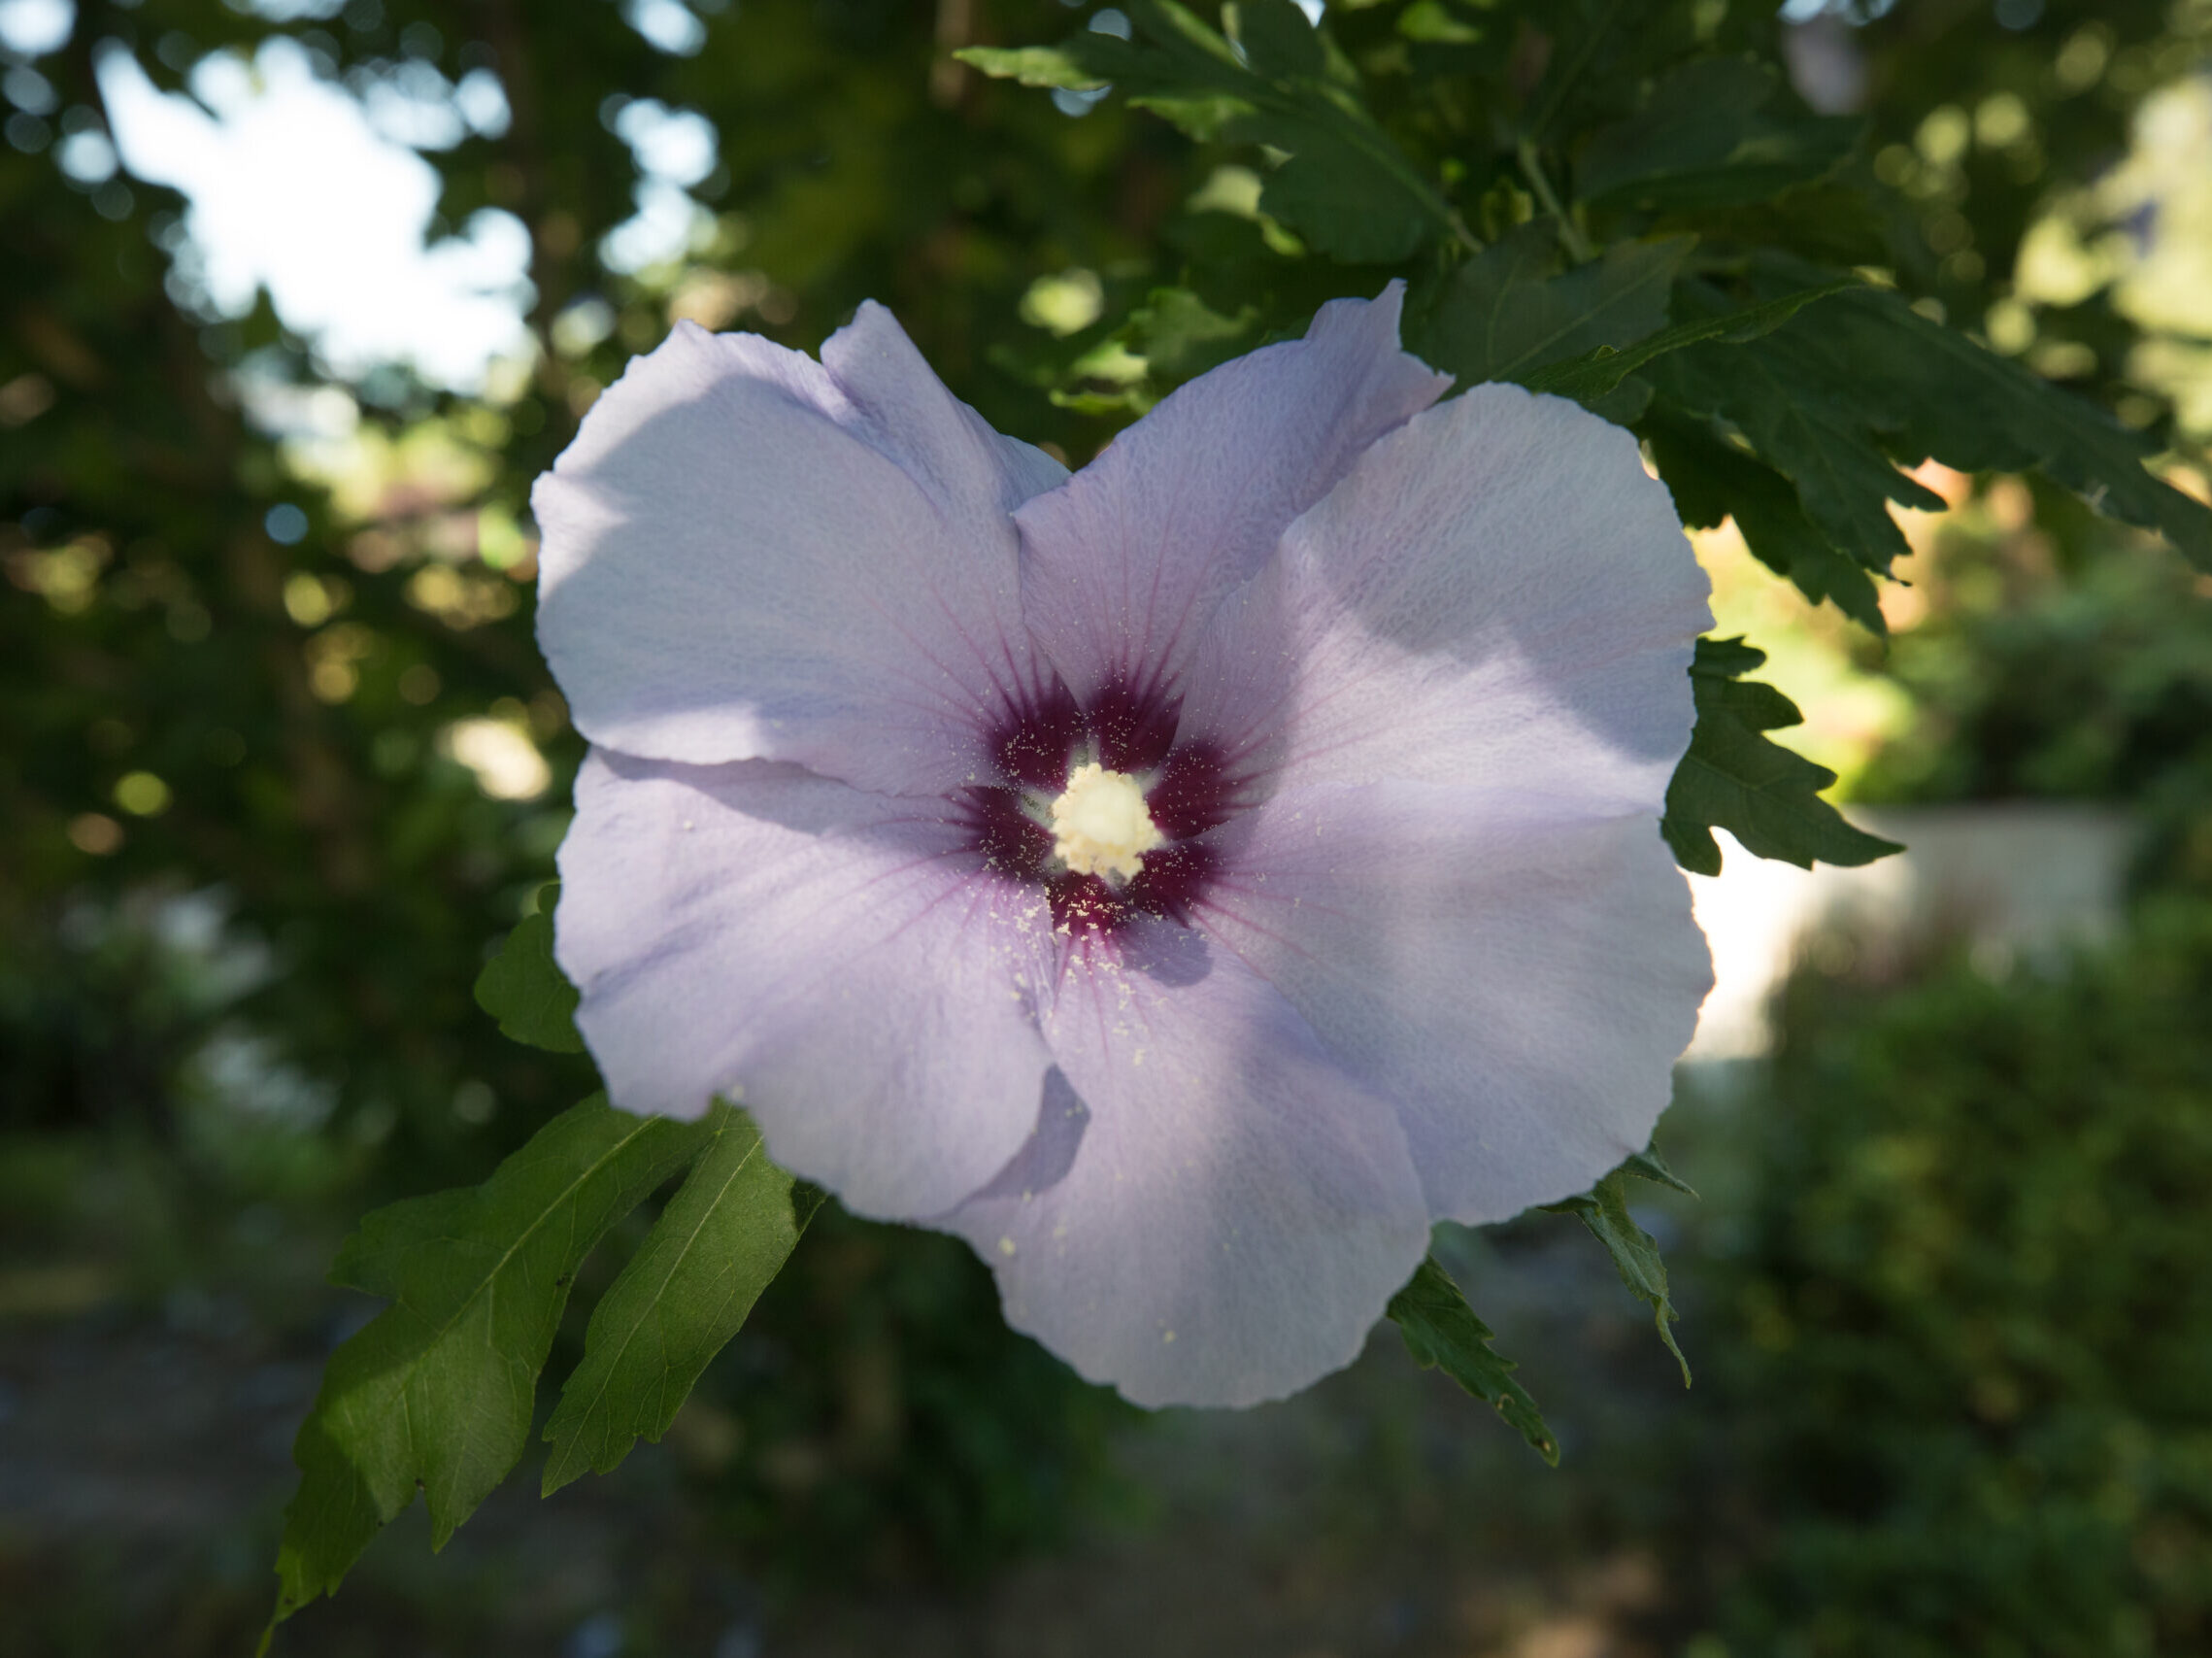 A purple and red hibiscus or Rose of Sharon